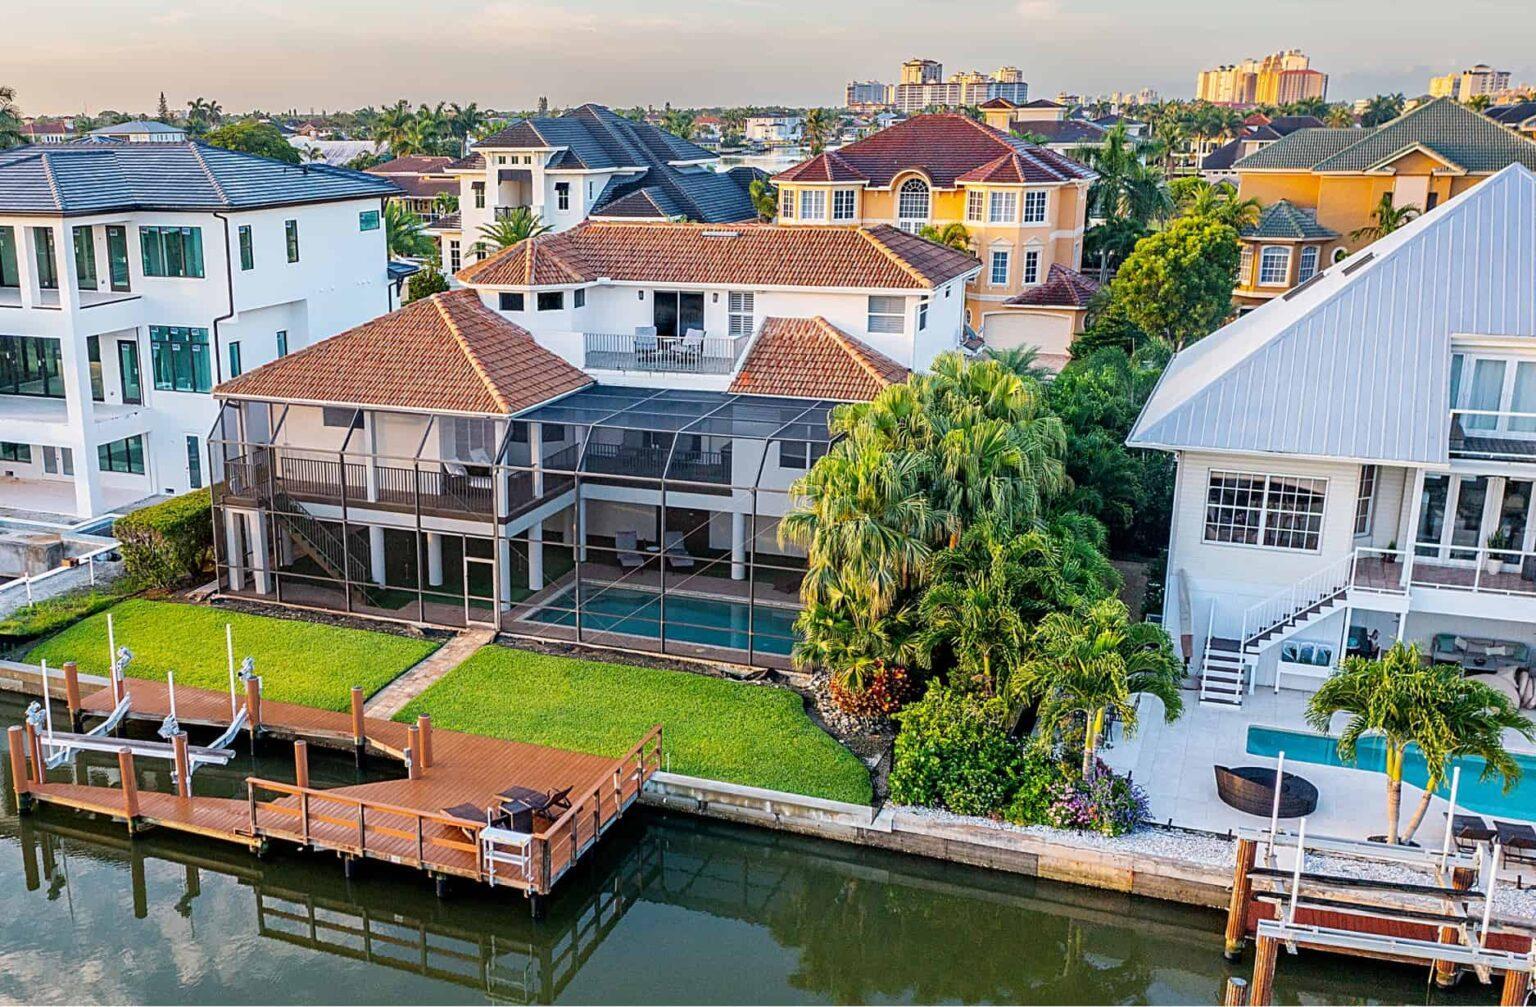 naples, fl vacation home Backyard from aerial shot. on canal with boat dock and screened in pool